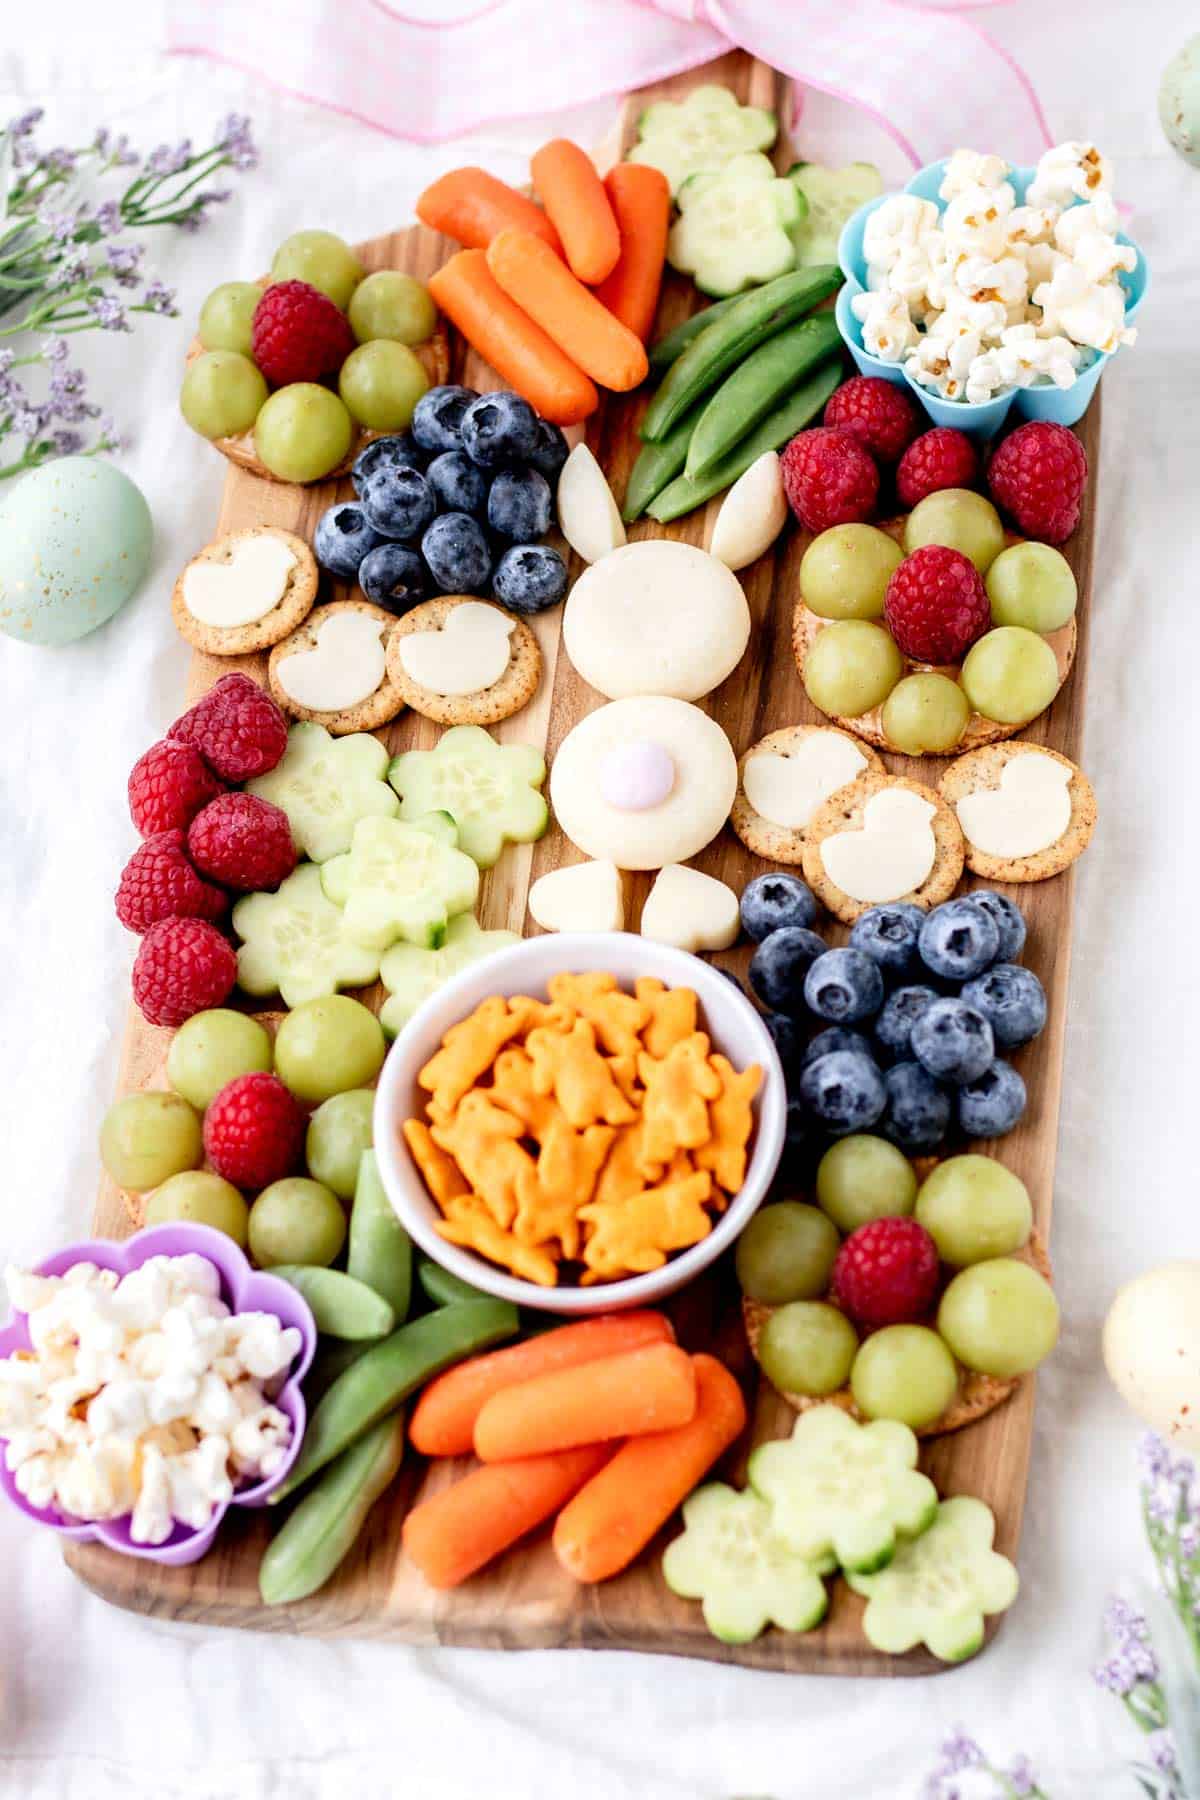 A wooden board with an Easter bunny made out of baby bel cheese, surrounded by various snacks like grapes, raspberries, carrots, and bunny-shaped crackers.